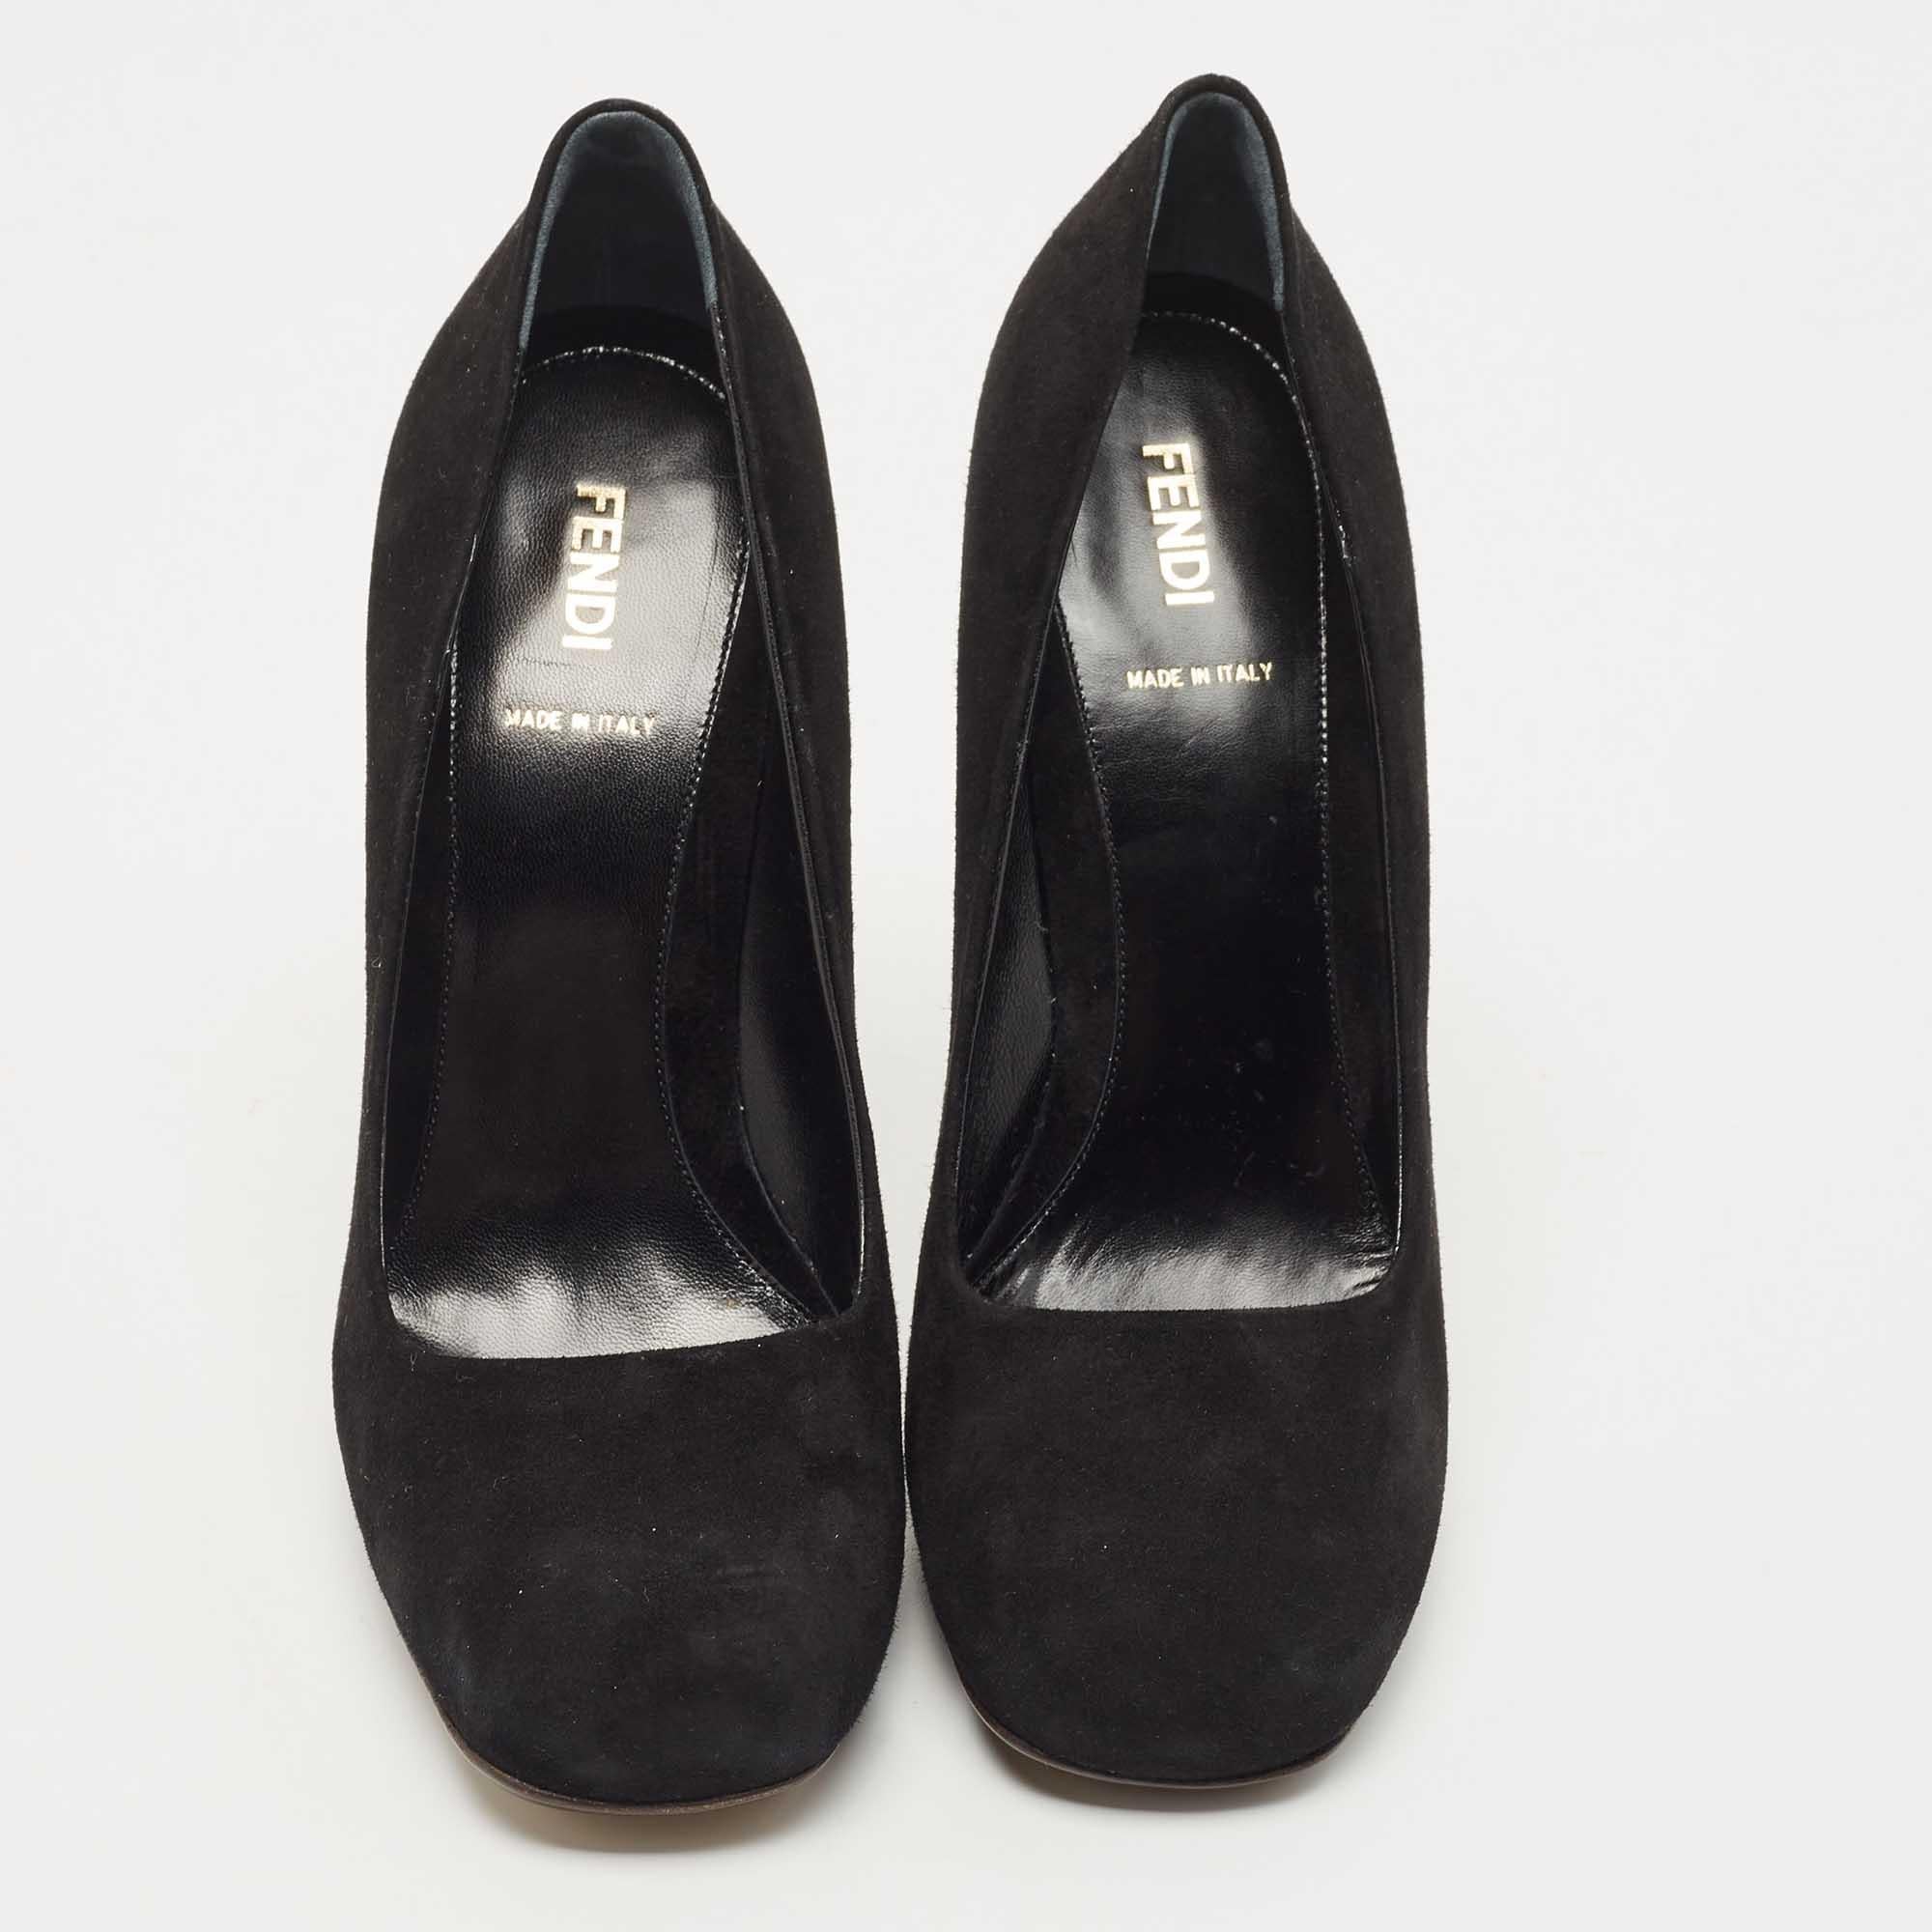 Perfectly sewn and finished to ensure an elegant look and fit, these Fendi black shoes are a purchase you'll love flaunting. They look great on the feet.

Includes: Extra Heels, Original Dustbag, Original Box

